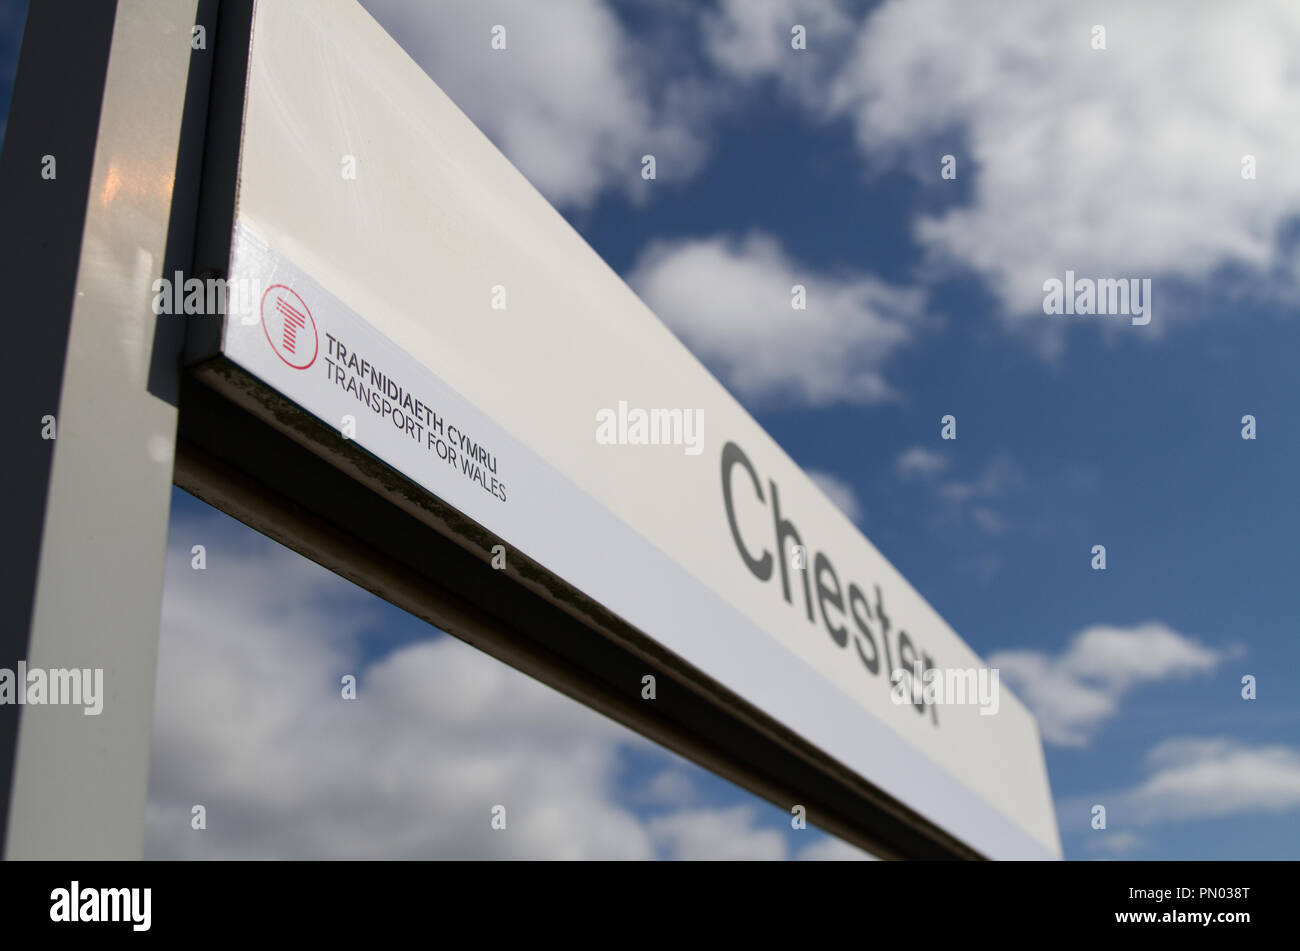 Chester Railway Station in England sign against a blue sky showing Transport for Wales brand carried by the new operator Keolis Amey. Stock Photo